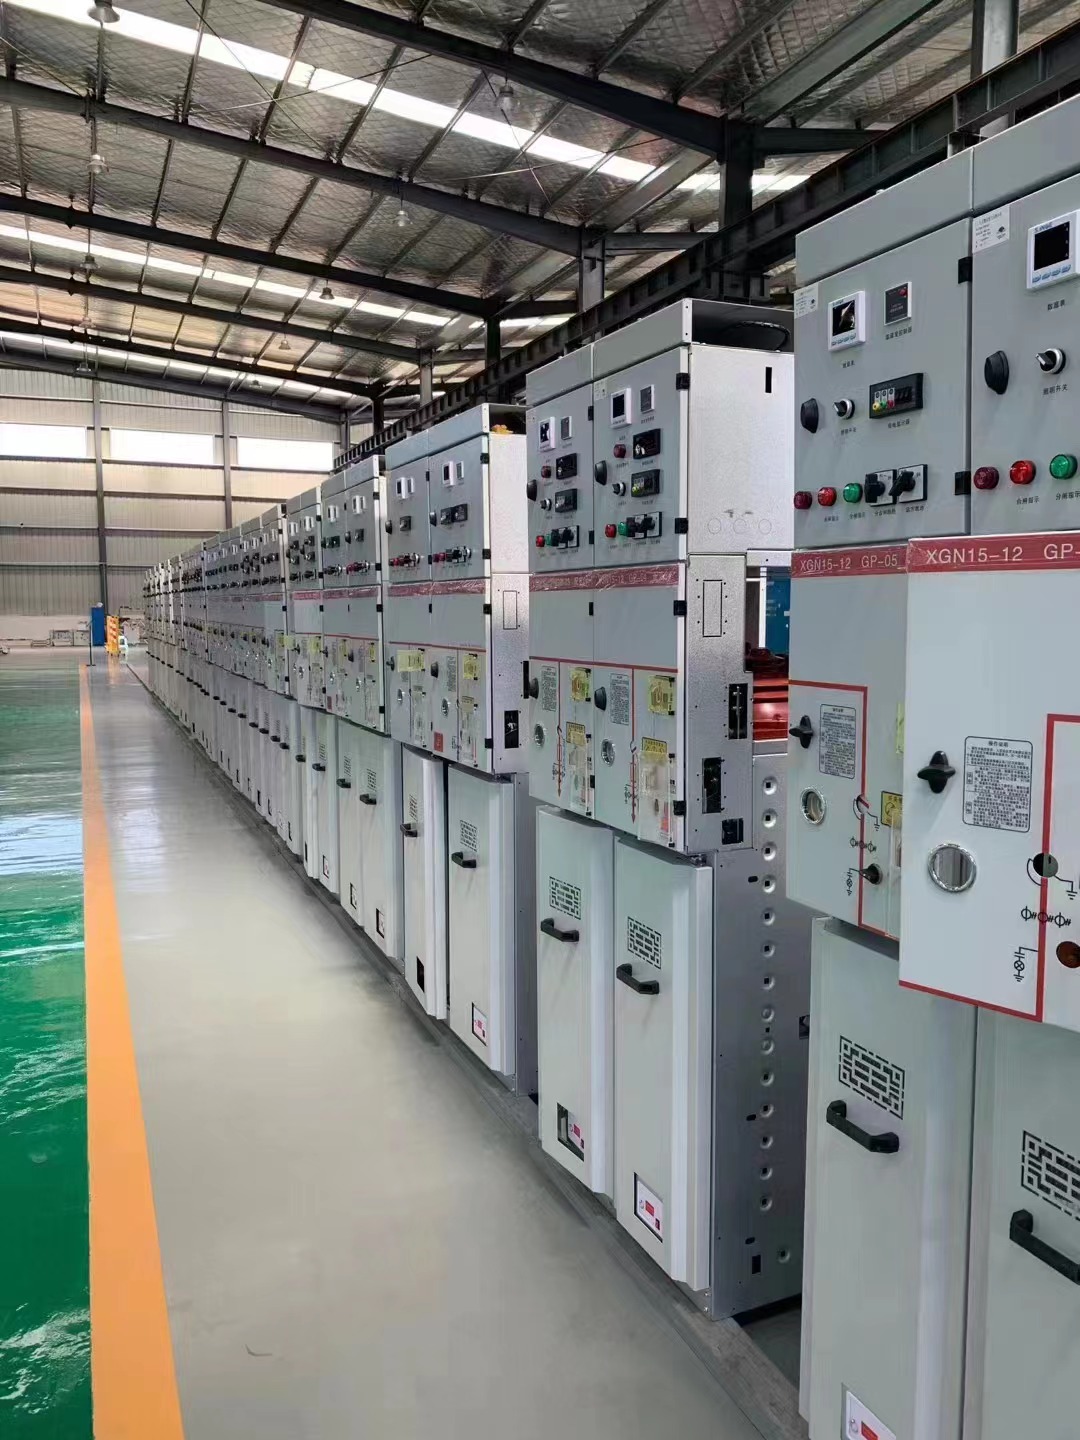 Why can SPL be a high grade switchgear seller?-SPL- power transformer,electrical transformer,Combined compact substation,Metalclad AC Enclosed Switchgear,Low Voltage Switchgear,Indoor AC Metal Clad Intermediate Switchgear,Non-encapsulated Dry-type Power Transformer,Unwrapped coil dry-type transformer,Epoxy resin cast silicon steel sheet dry-type transformer,Epoxy resin cast amorphous alloy dry-type transformer,Amorphous alloy oil-immersed power transformer,Silicon steel sheet oil-immersed power,electric transformer,Distribution Transformer,voltage transformer,step-down transformer,reducing transformer,low-loss power transformer,loss power transformer,Oil-type Transformer,Oil Distribution Transformer,Transformer-Oil-lmmersed,Oil Transformer,Oil Immersed Transformer,three phase oil immersed power transformer,oil filled electrical transformer,Sealed amorphous alloy power transformer,Dry Type Transformer,dry Transformer,Cast Resin Dry Type Transformer,dry-type transformer,resin-casting type transformer,resinated dry type transformer,CRDT,Unwrapped coil power transformer,three phase dry Transformer,articulated unit substation,AS,Modular substation,transformer substation,electric substation,Power Sub-station,Preinstalled substation,YBM,prefabricated substation,Distribution Substation,compact substation,MV power stations,LV power stations,HV power stations,Switchgear Cabinet,MV Switchgear Cabinet,LV Switchgear Cabinet,HV Switchgear Cabinet,pull-out switch cabinet,Ac metal closed ring network switchgear,Indoor metal armored central switchgear,Box-type substation,custom transformers,customized transformers,Metal enclosed electrical switchgear,LV Switchgear Cabinet,